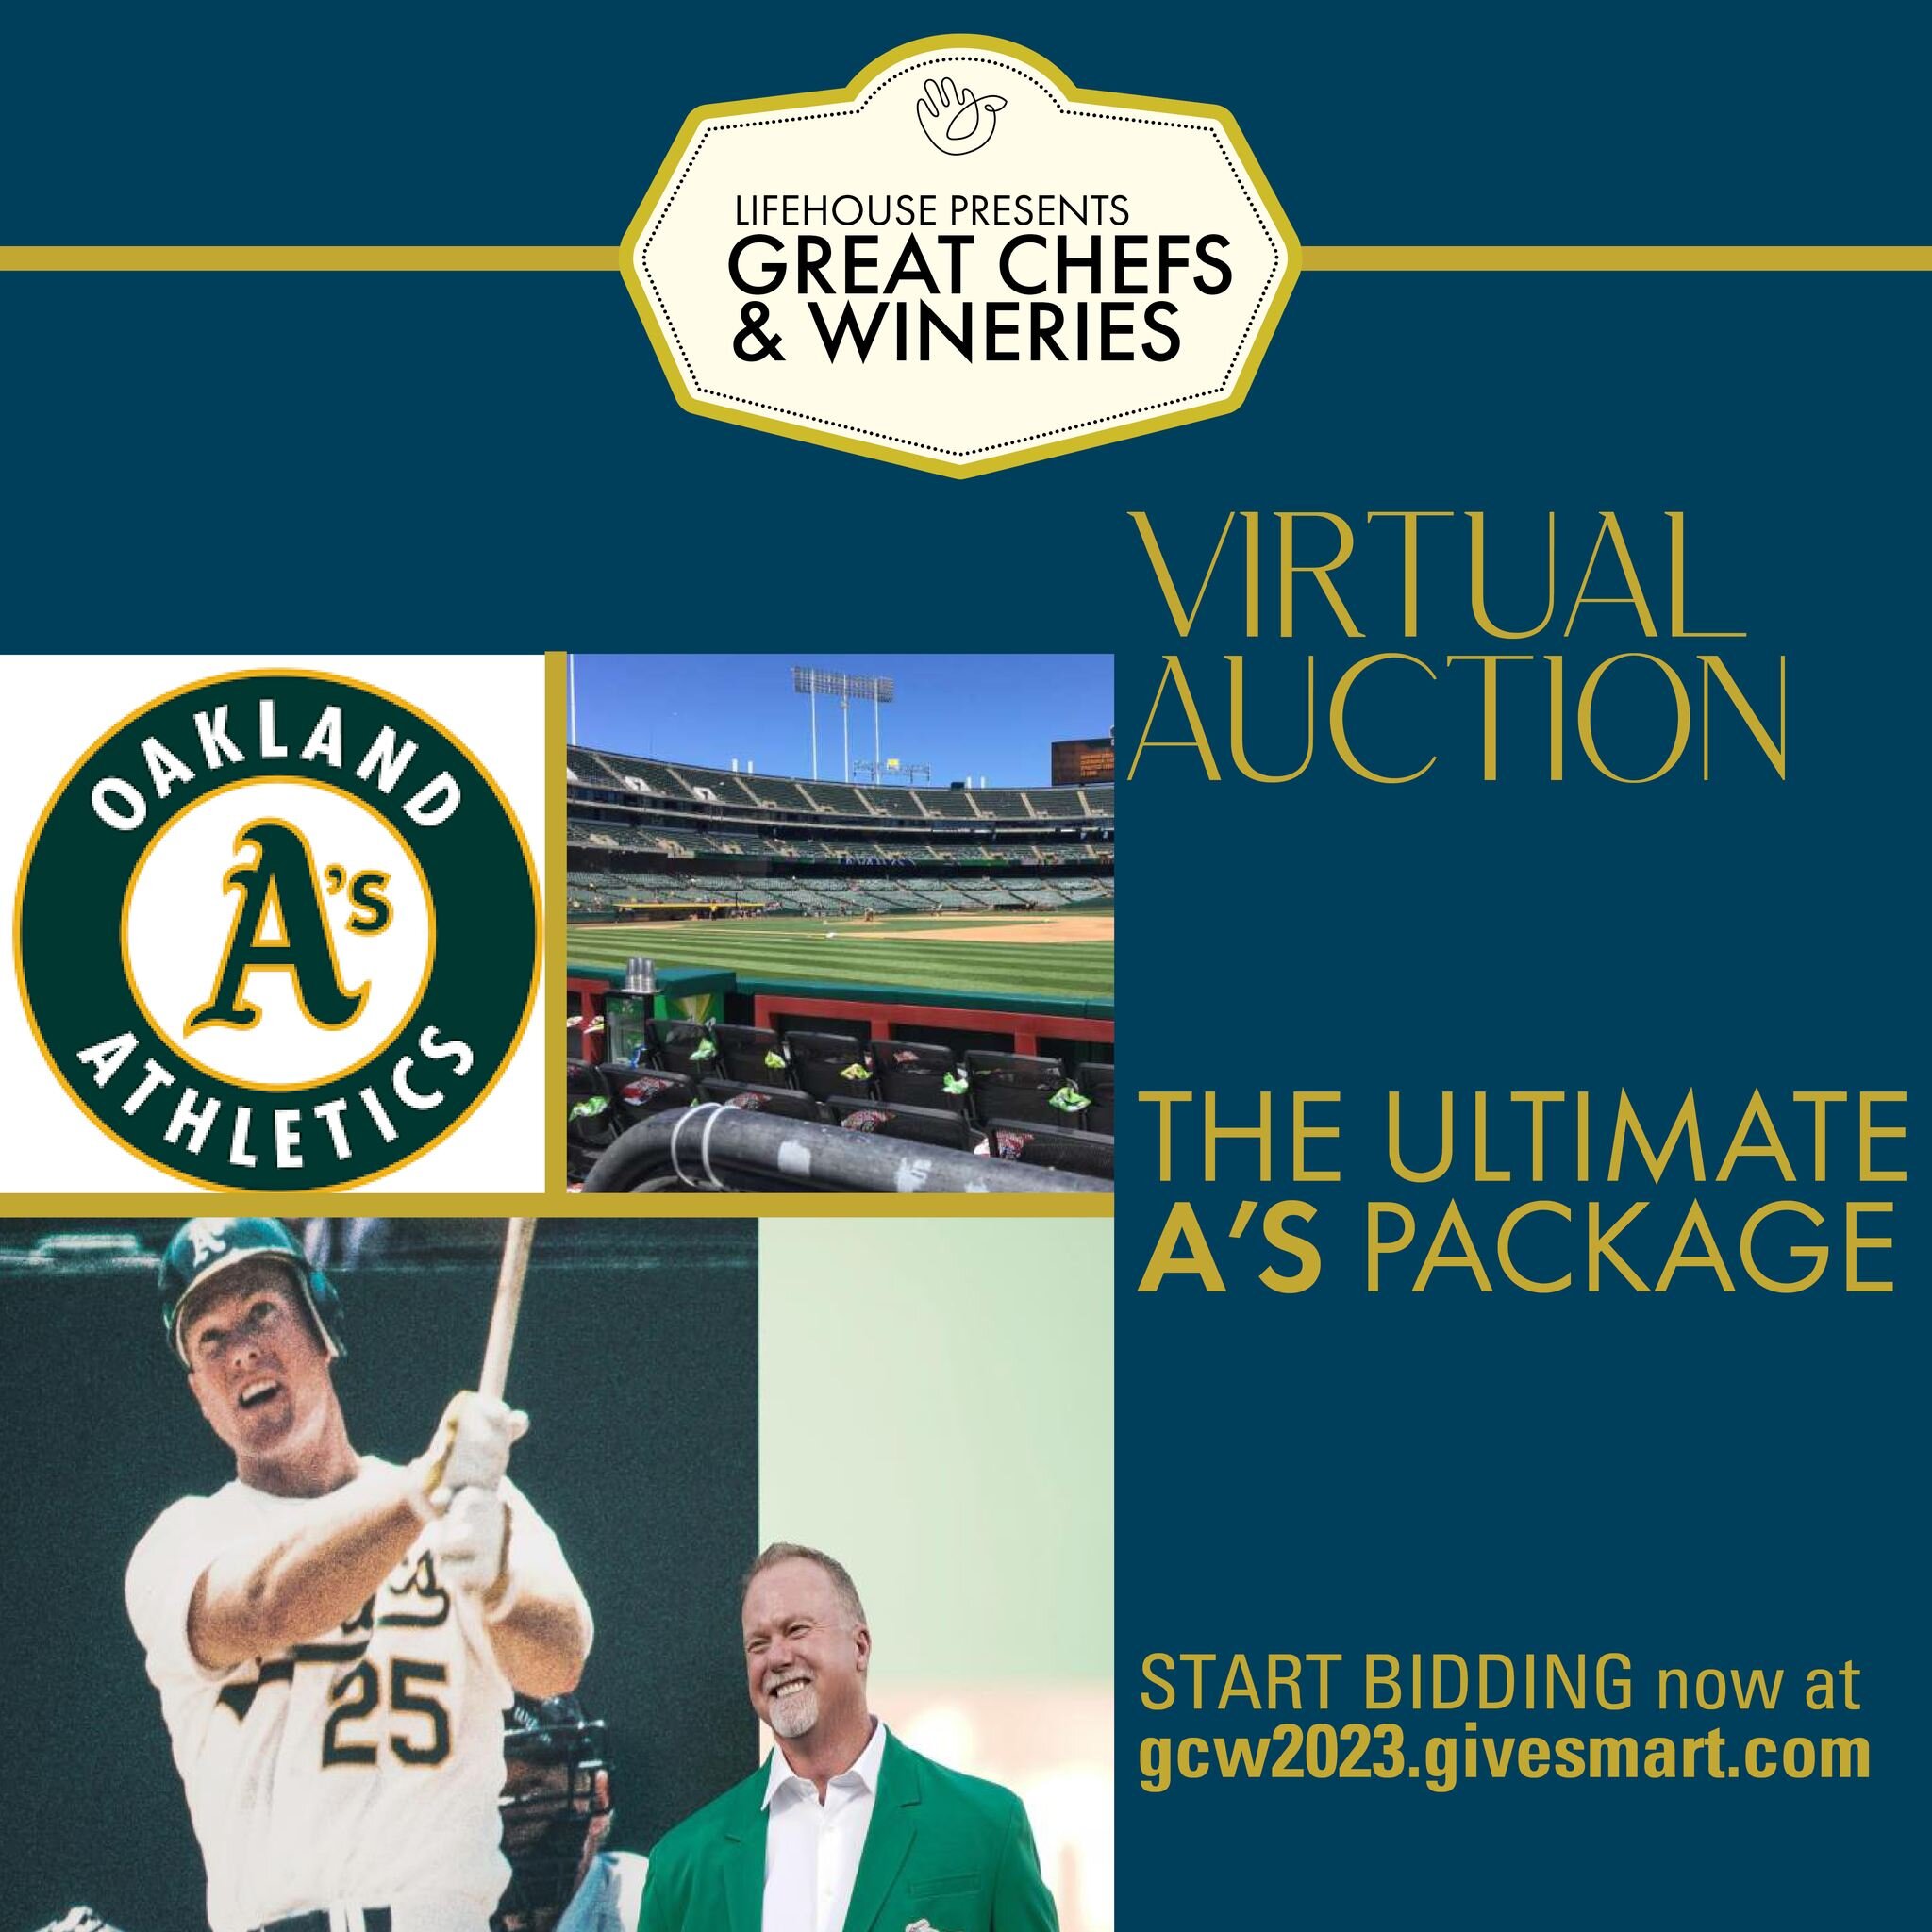 #VIRTUALAUCTIONHIGHLIGHT :: This package hits it out of the ballpark!  4 field box tickets to see the Oakland As take on the 2021 World Series champion Atlanta Braves at the Oakland Coliseum on May 29, 2023. These seats with butler service are right 